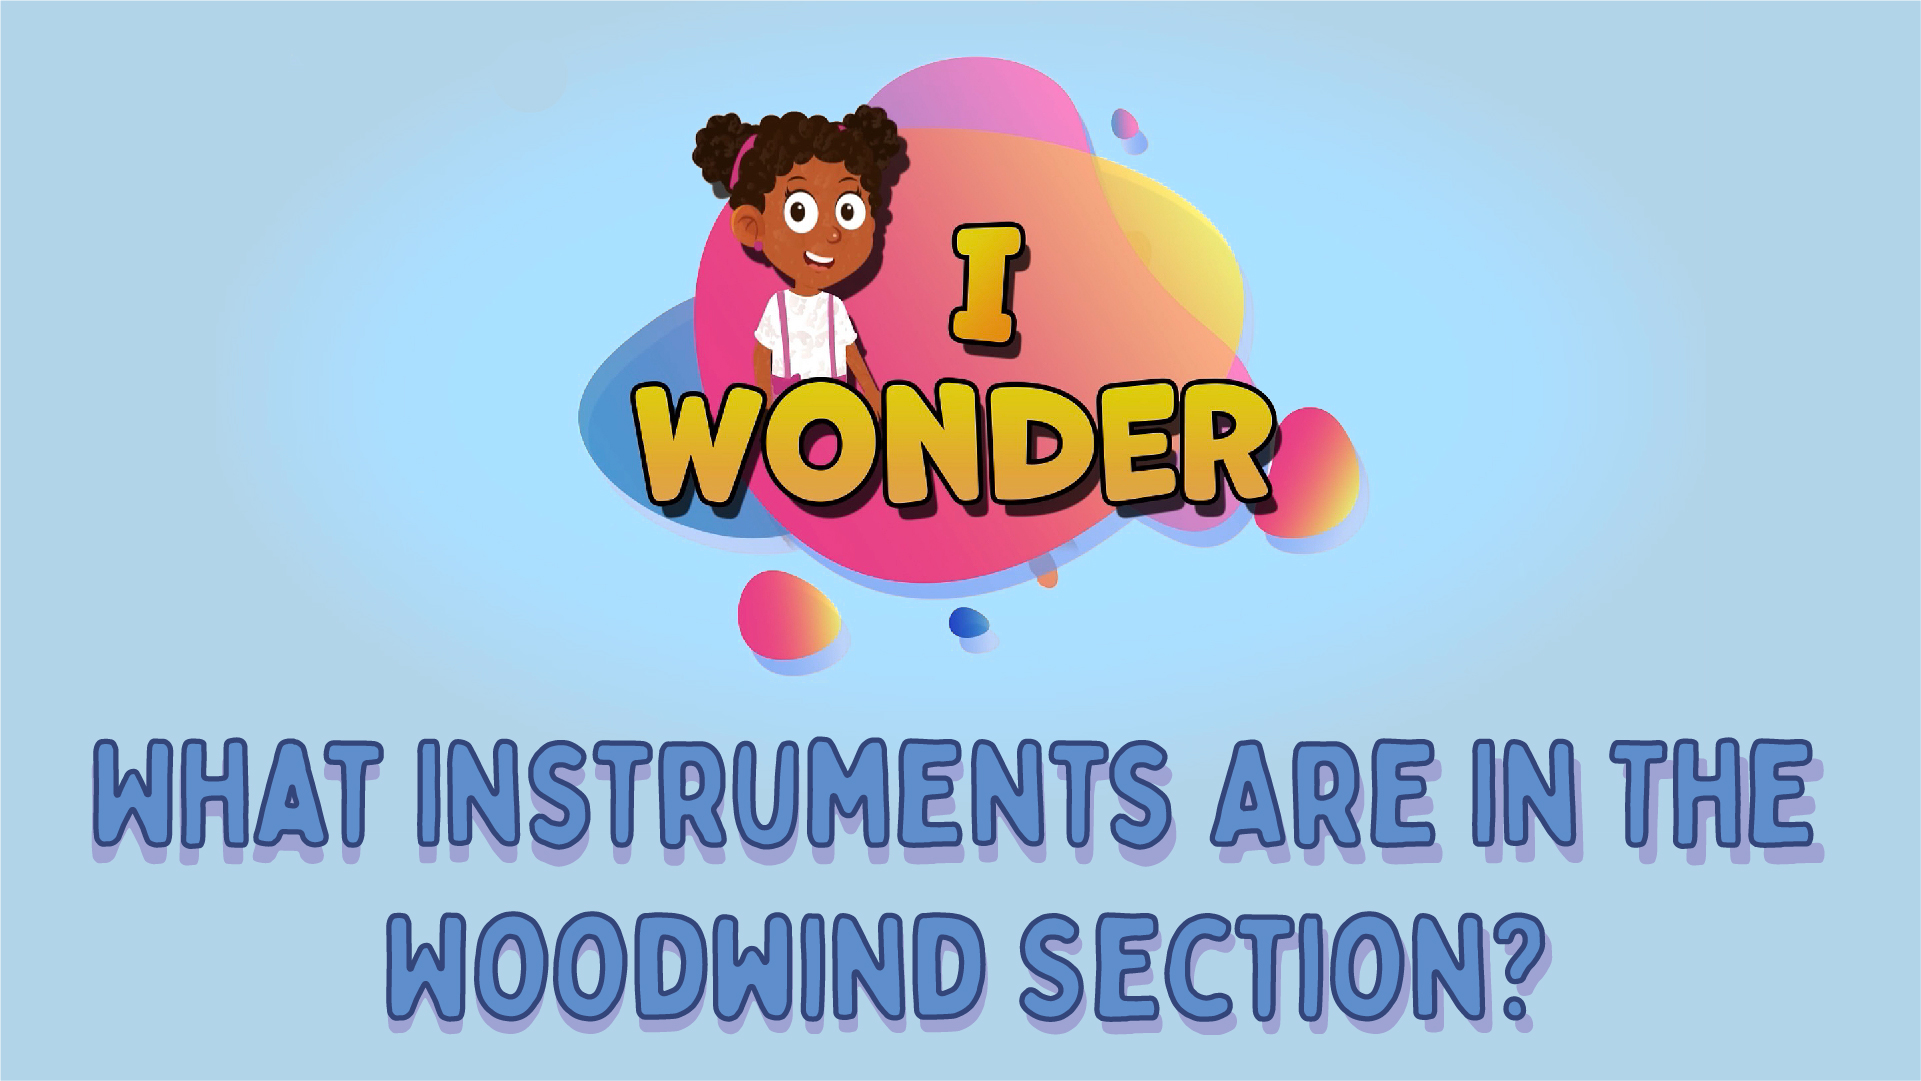 What Instruments Are In The Woodwind Section?